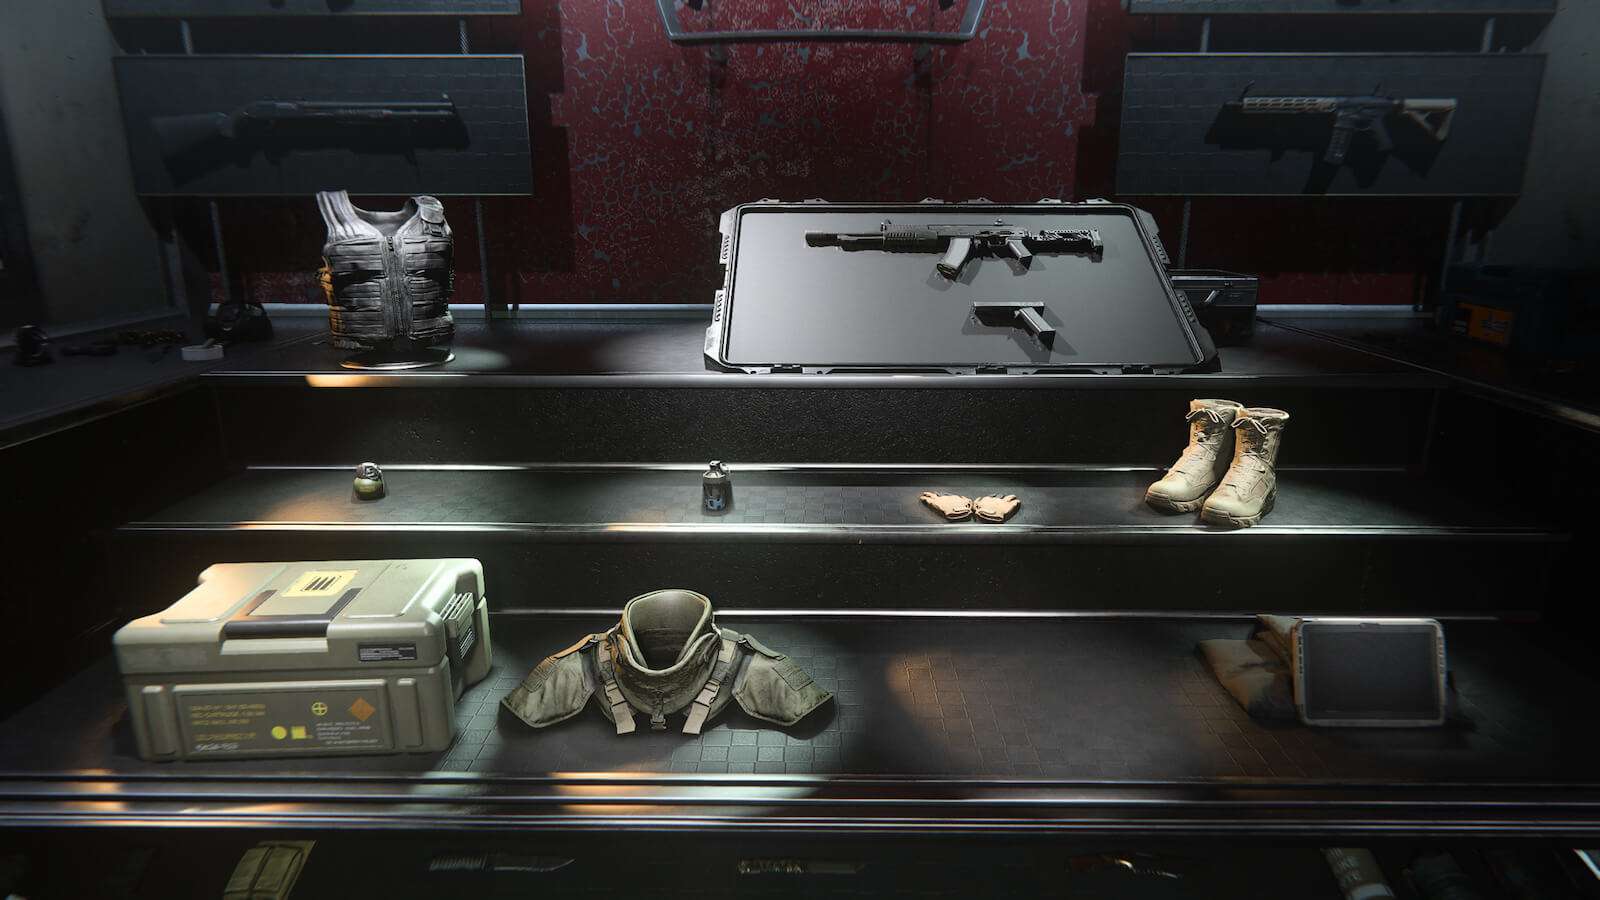 Modern Warfare 3 players plead for "horrendous" Armory System to be removed